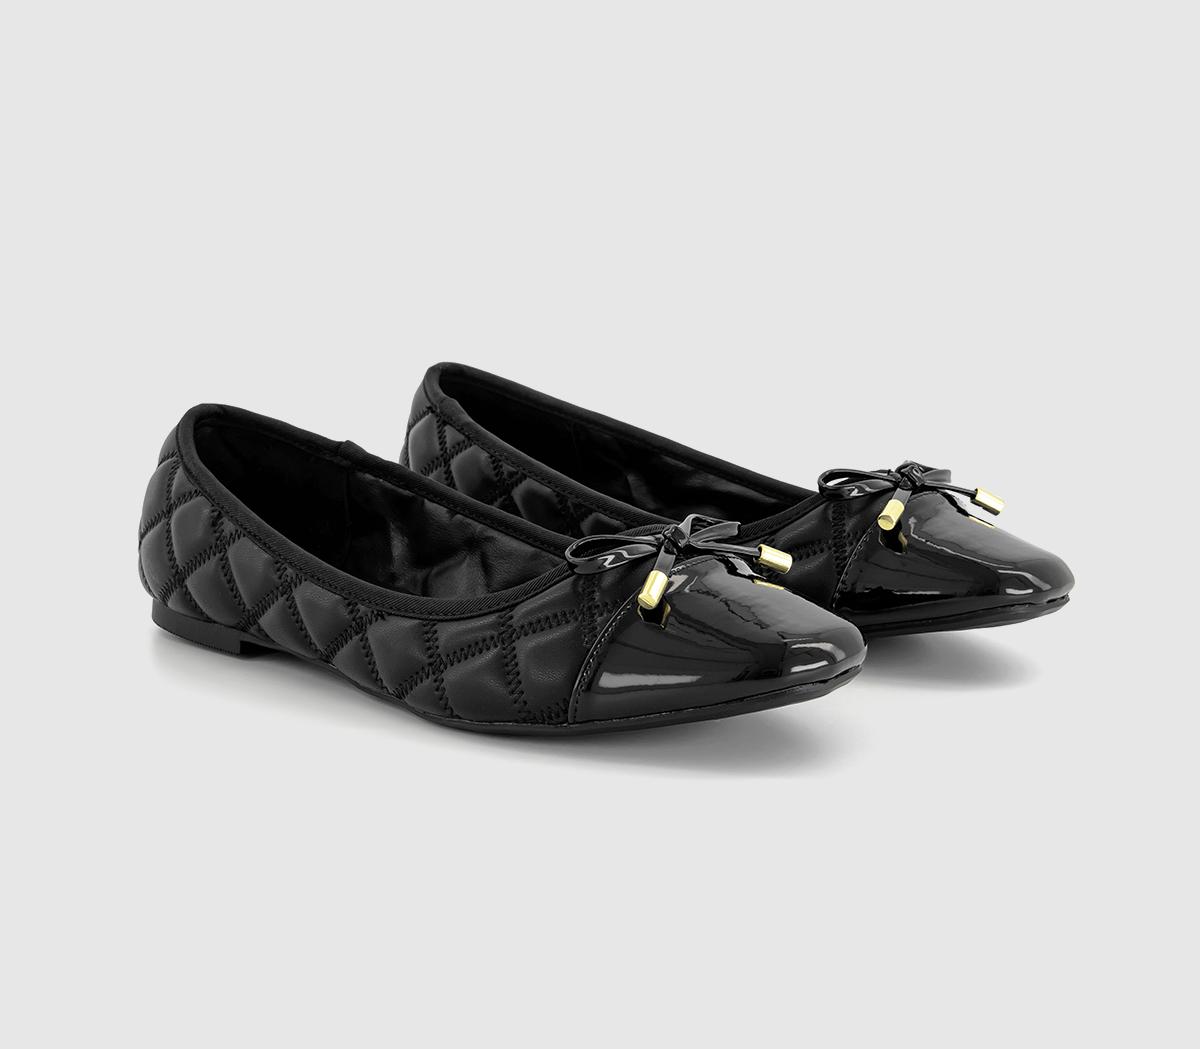 OFFICE Womens Foreveryoung Quilted Toe Cap Bow Ballerina Shoes Black, 4